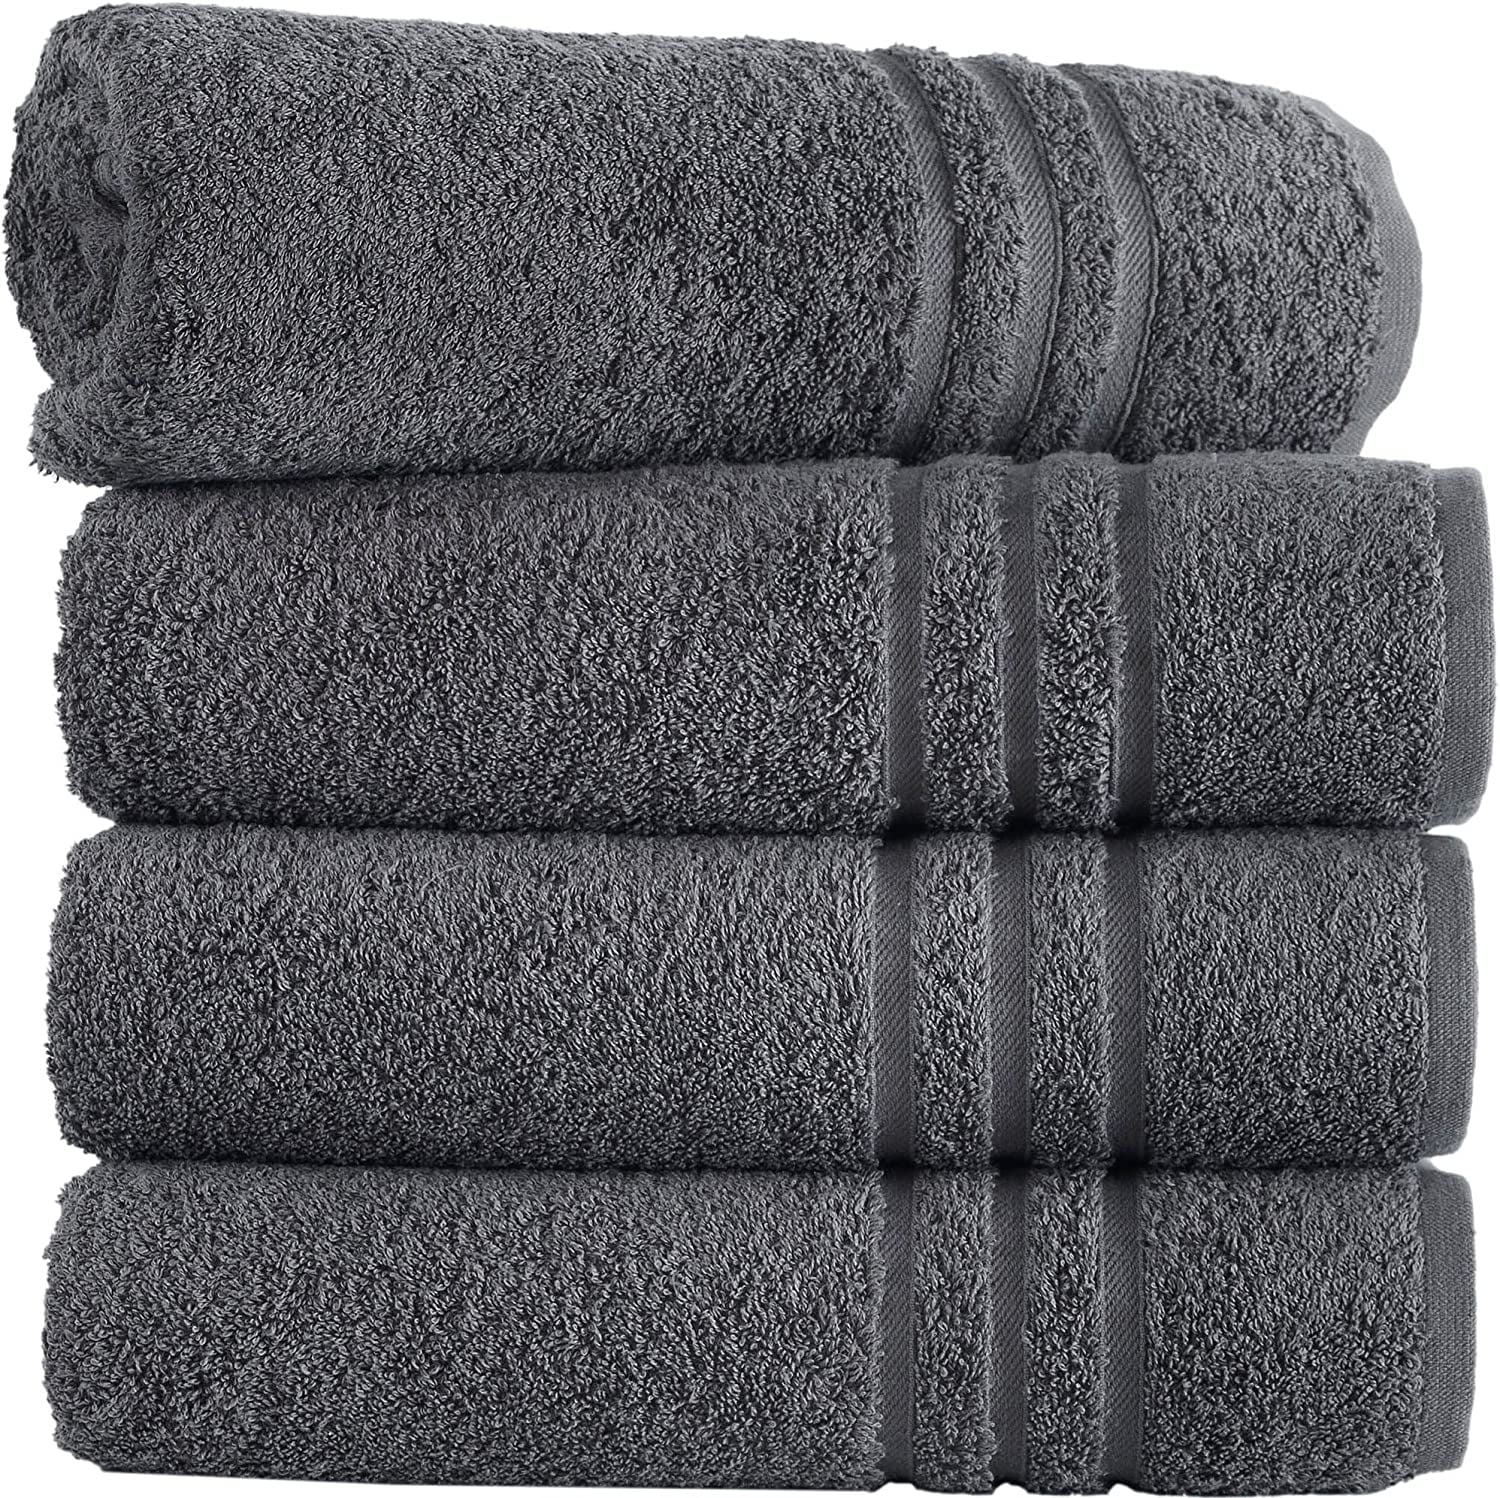 Hammam Linen Black Hand Towels 4-Pack - 16 x 29 Turkish Cotton Premium  Quality Soft and Absorbent Small Towels for Bathroom - Yahoo Shopping